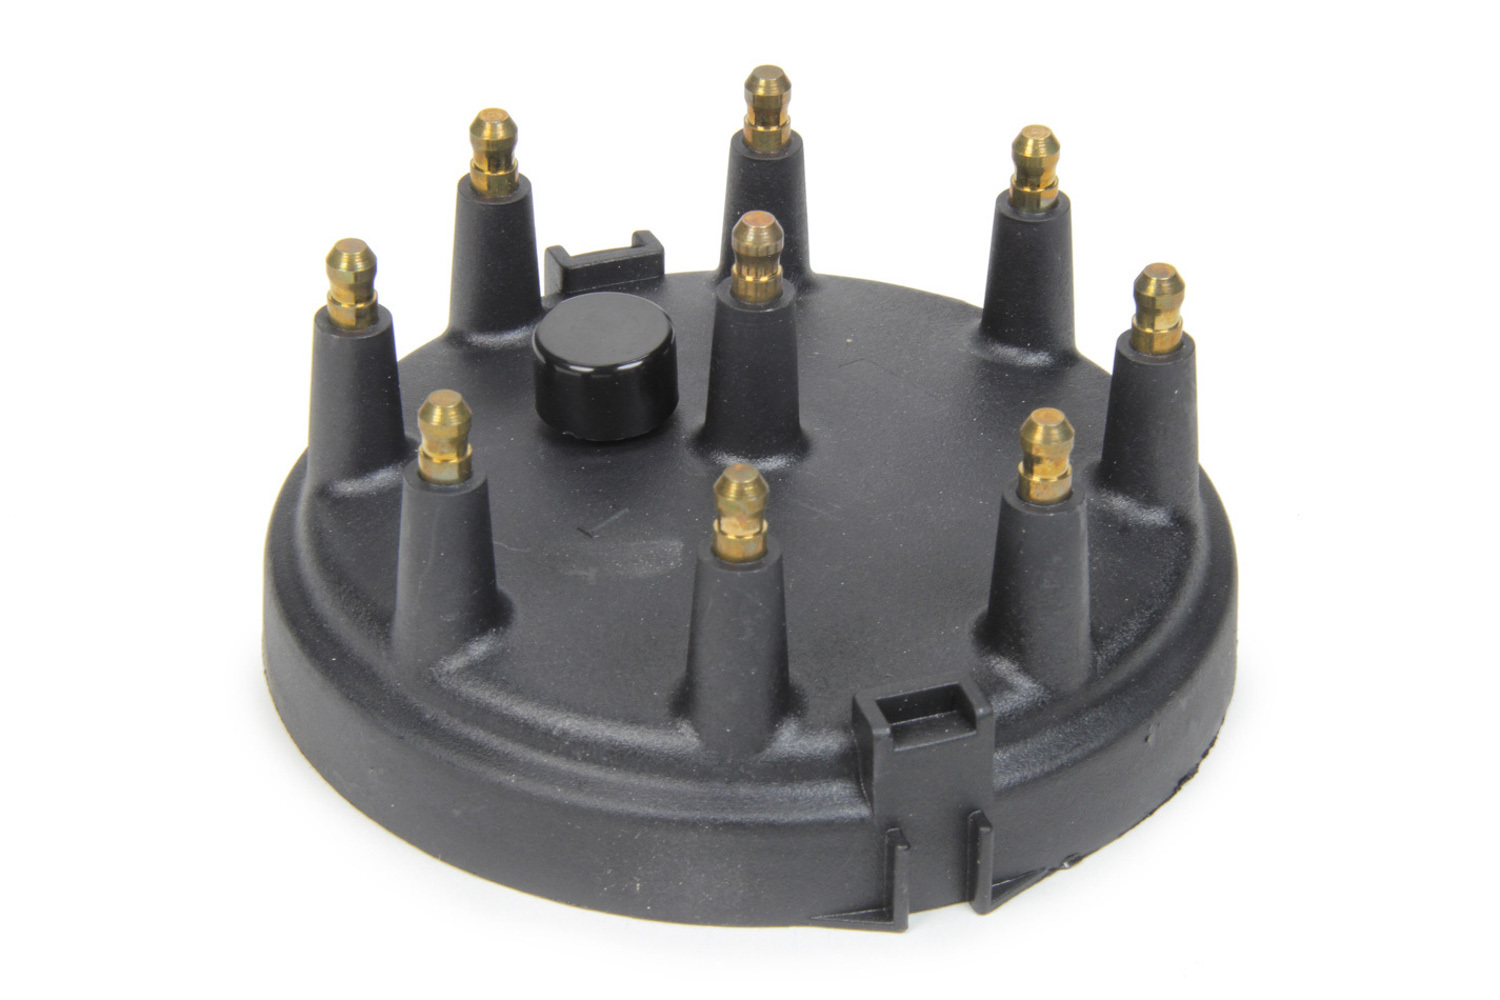 FAST 1000-1550 Distributor Cap, HEI Style Terminals, Brass Terminals, Clamp Down, Large Cap, Black, Vented, Crane Billet Series, Various Applications V8, Each